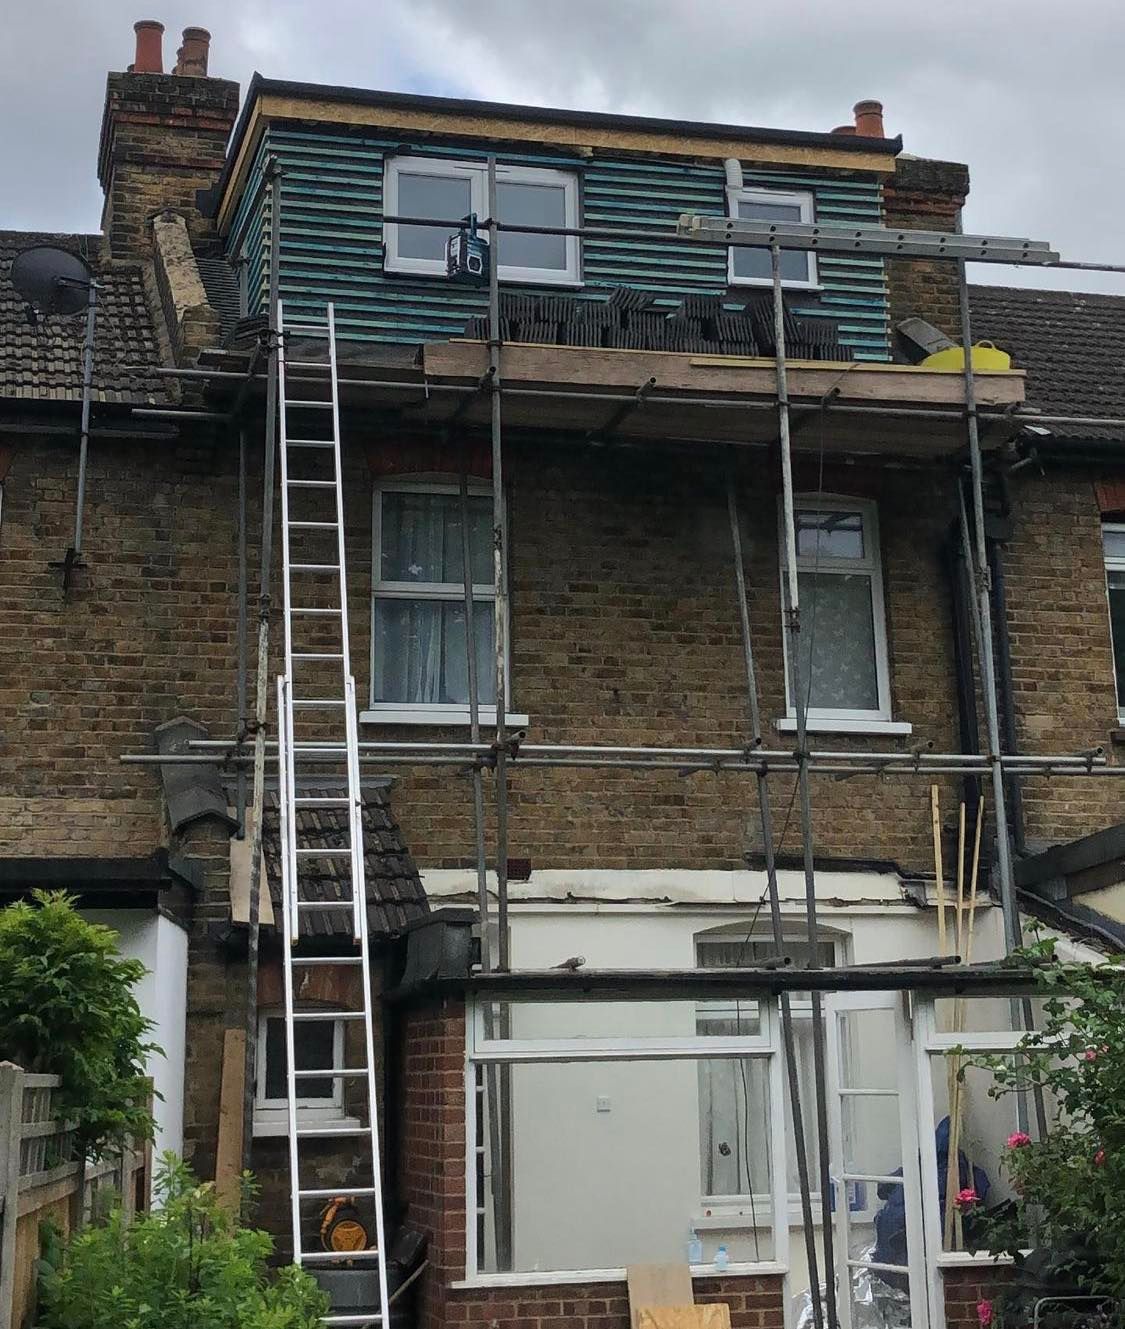 Dormer loft conversion getting new cladding installed on the exterior